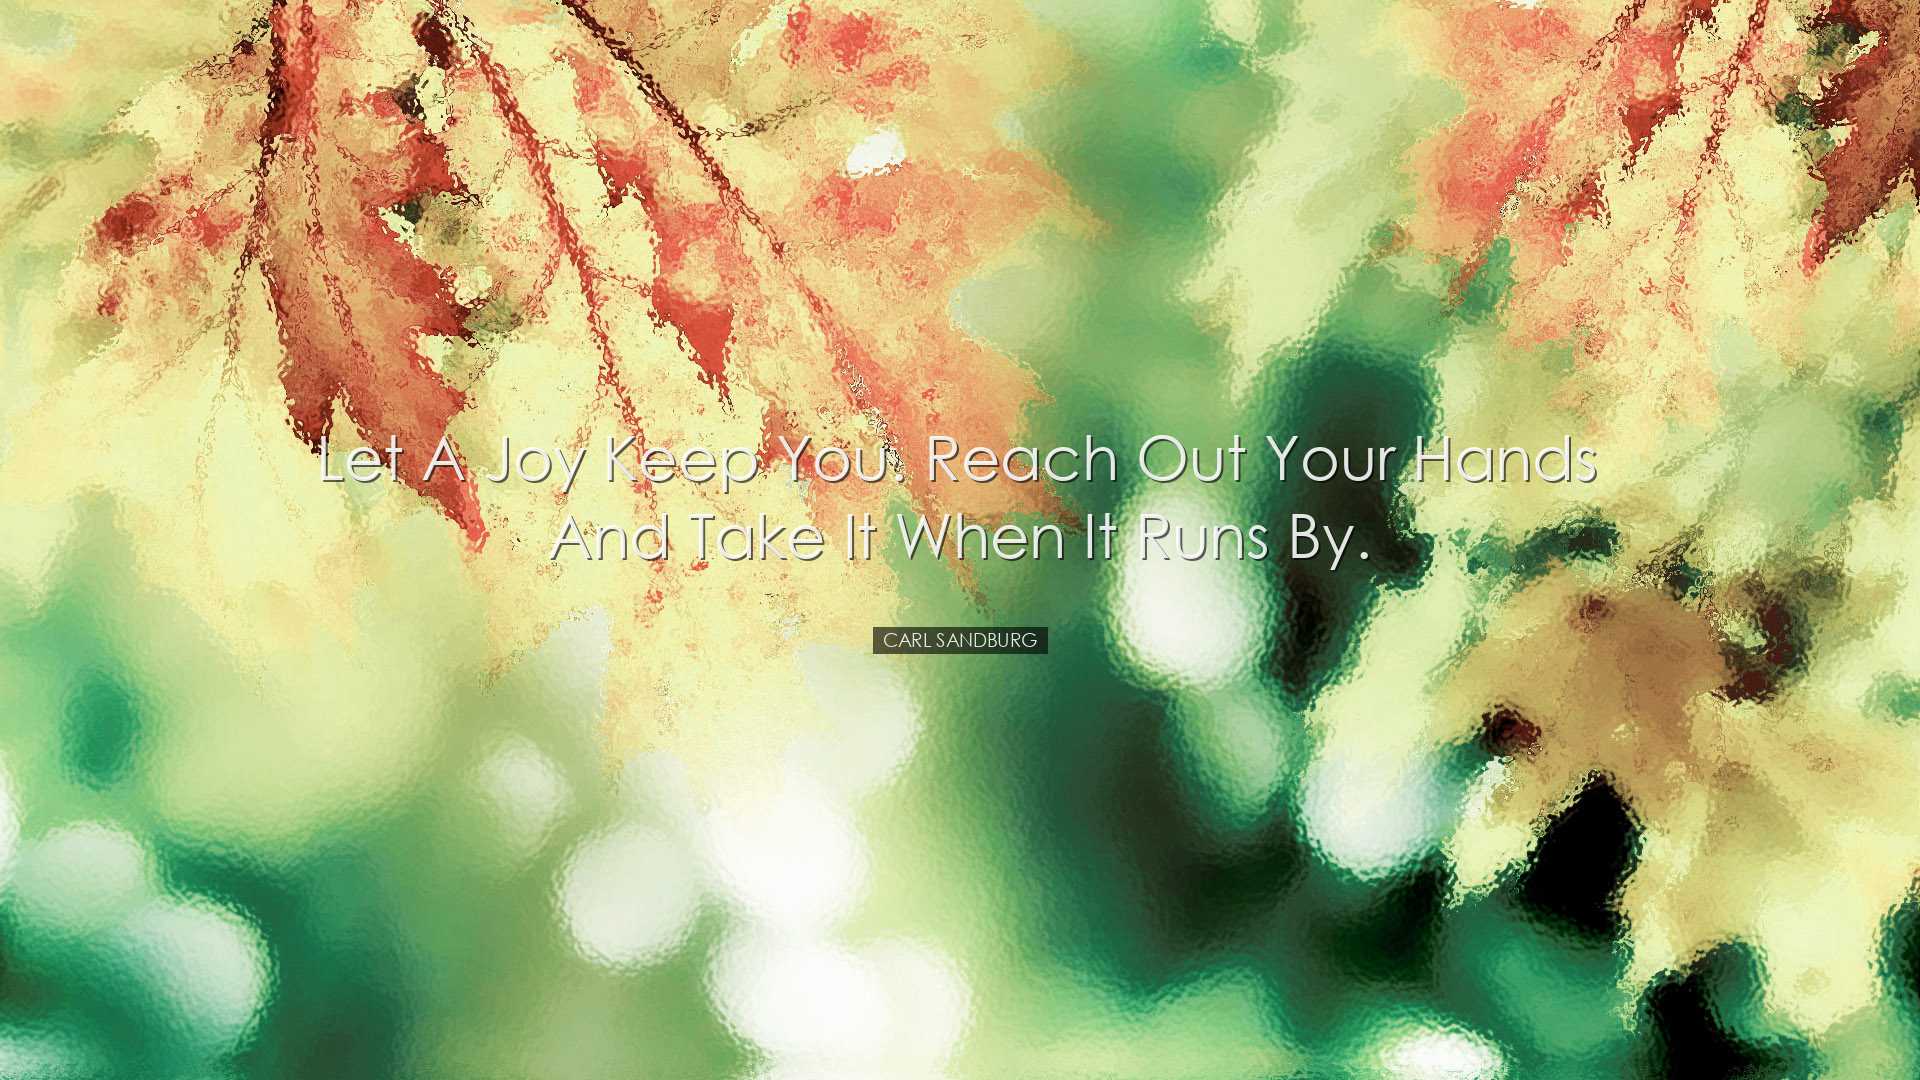 Let a joy keep you. Reach out your hands and take it when it runs